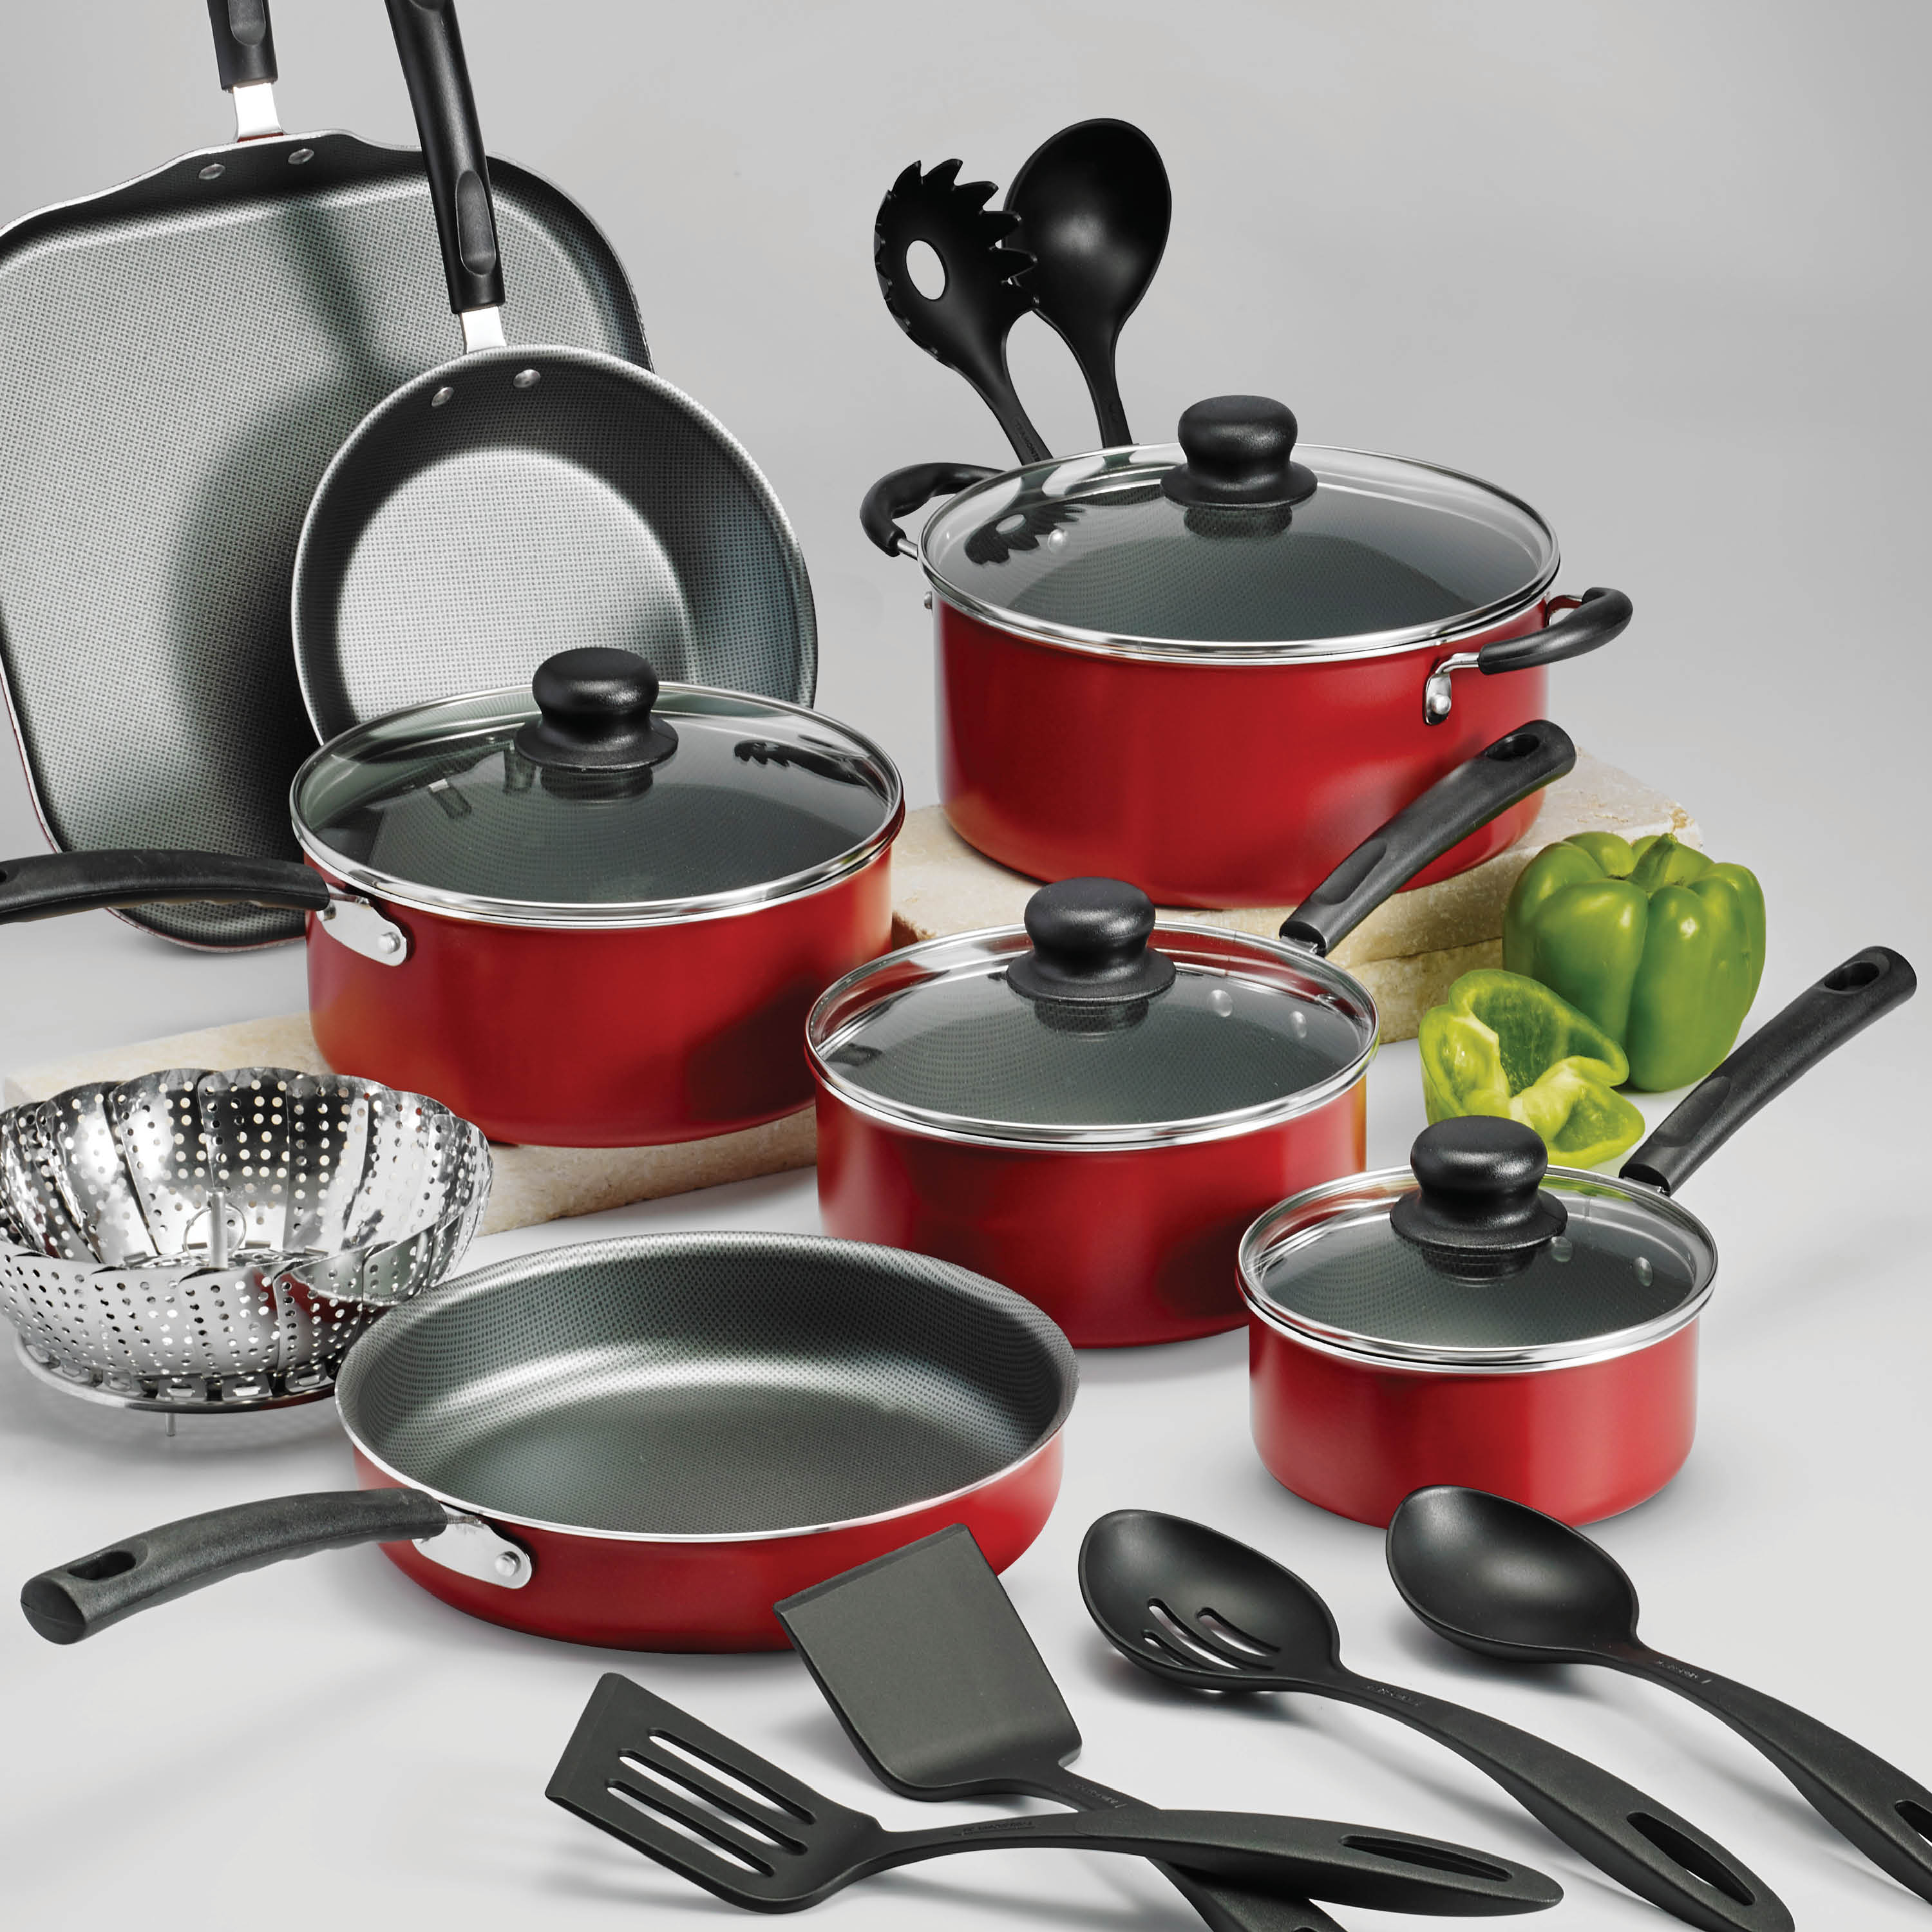 Tramontina Primaware 18 Piece Non-stick Cookware Set, Red - image 6 of 26